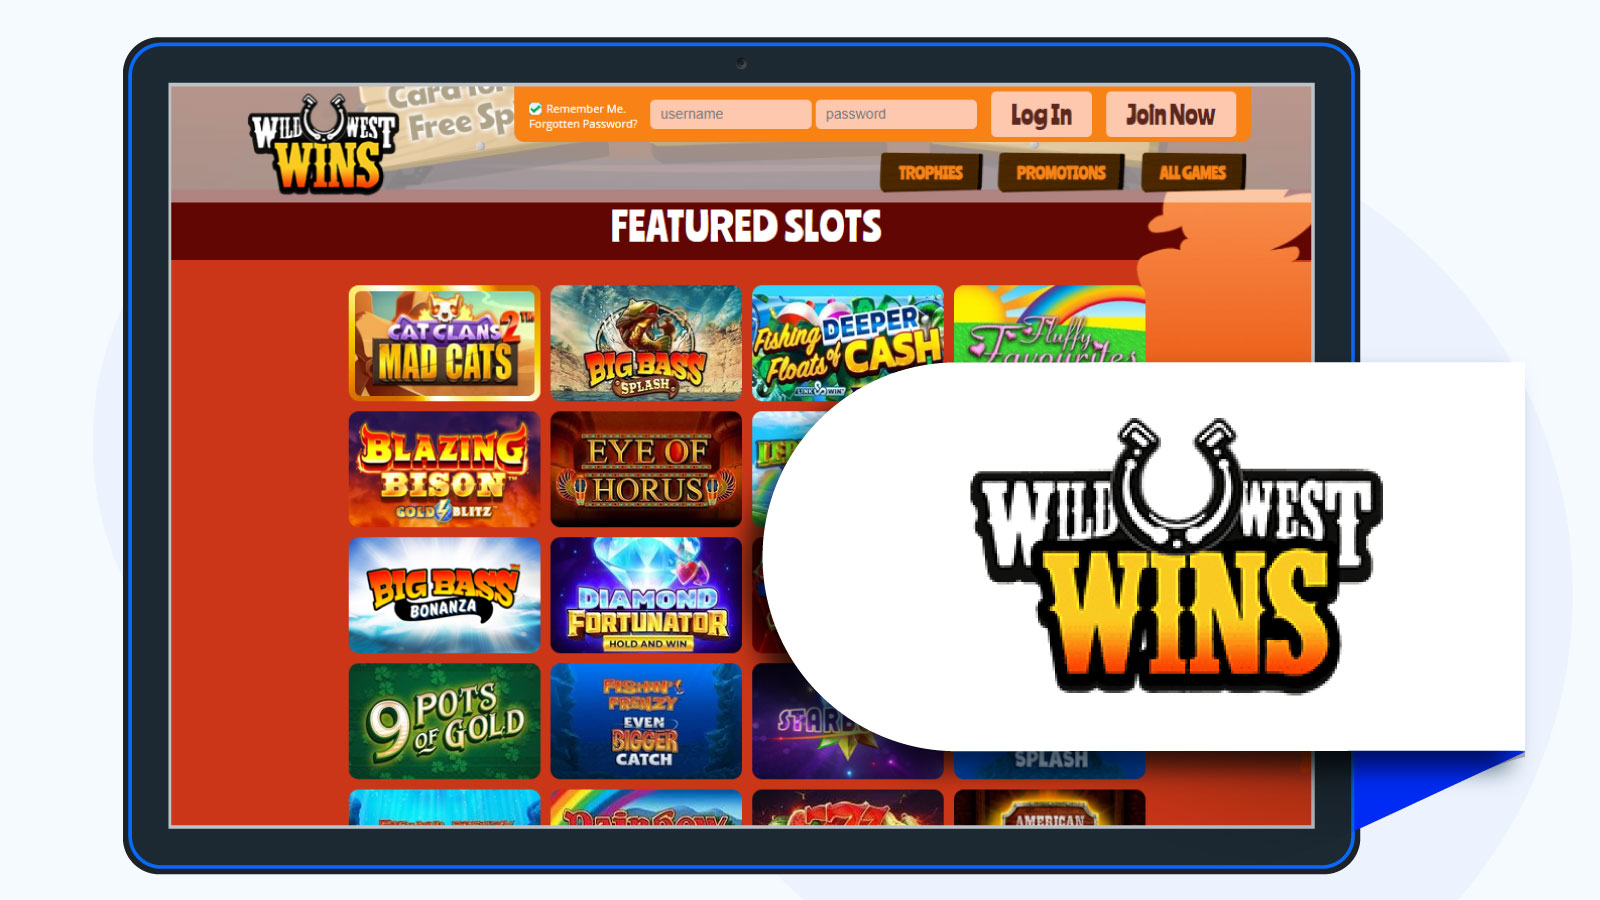 Wild West Wins casino slot games slection